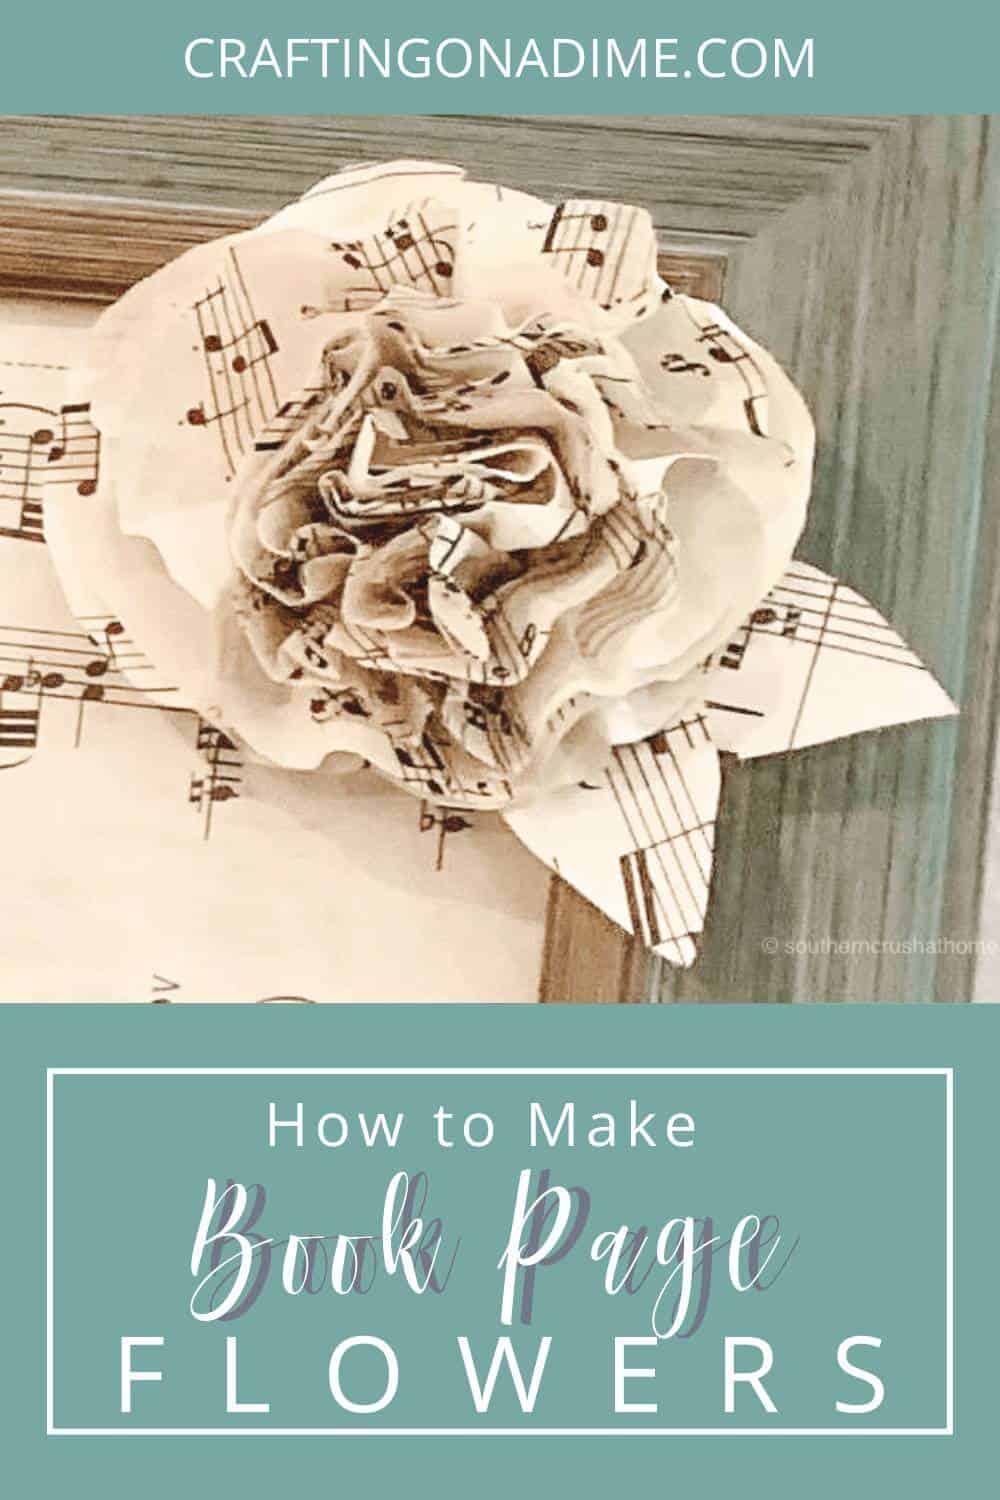 How to make book page flowers